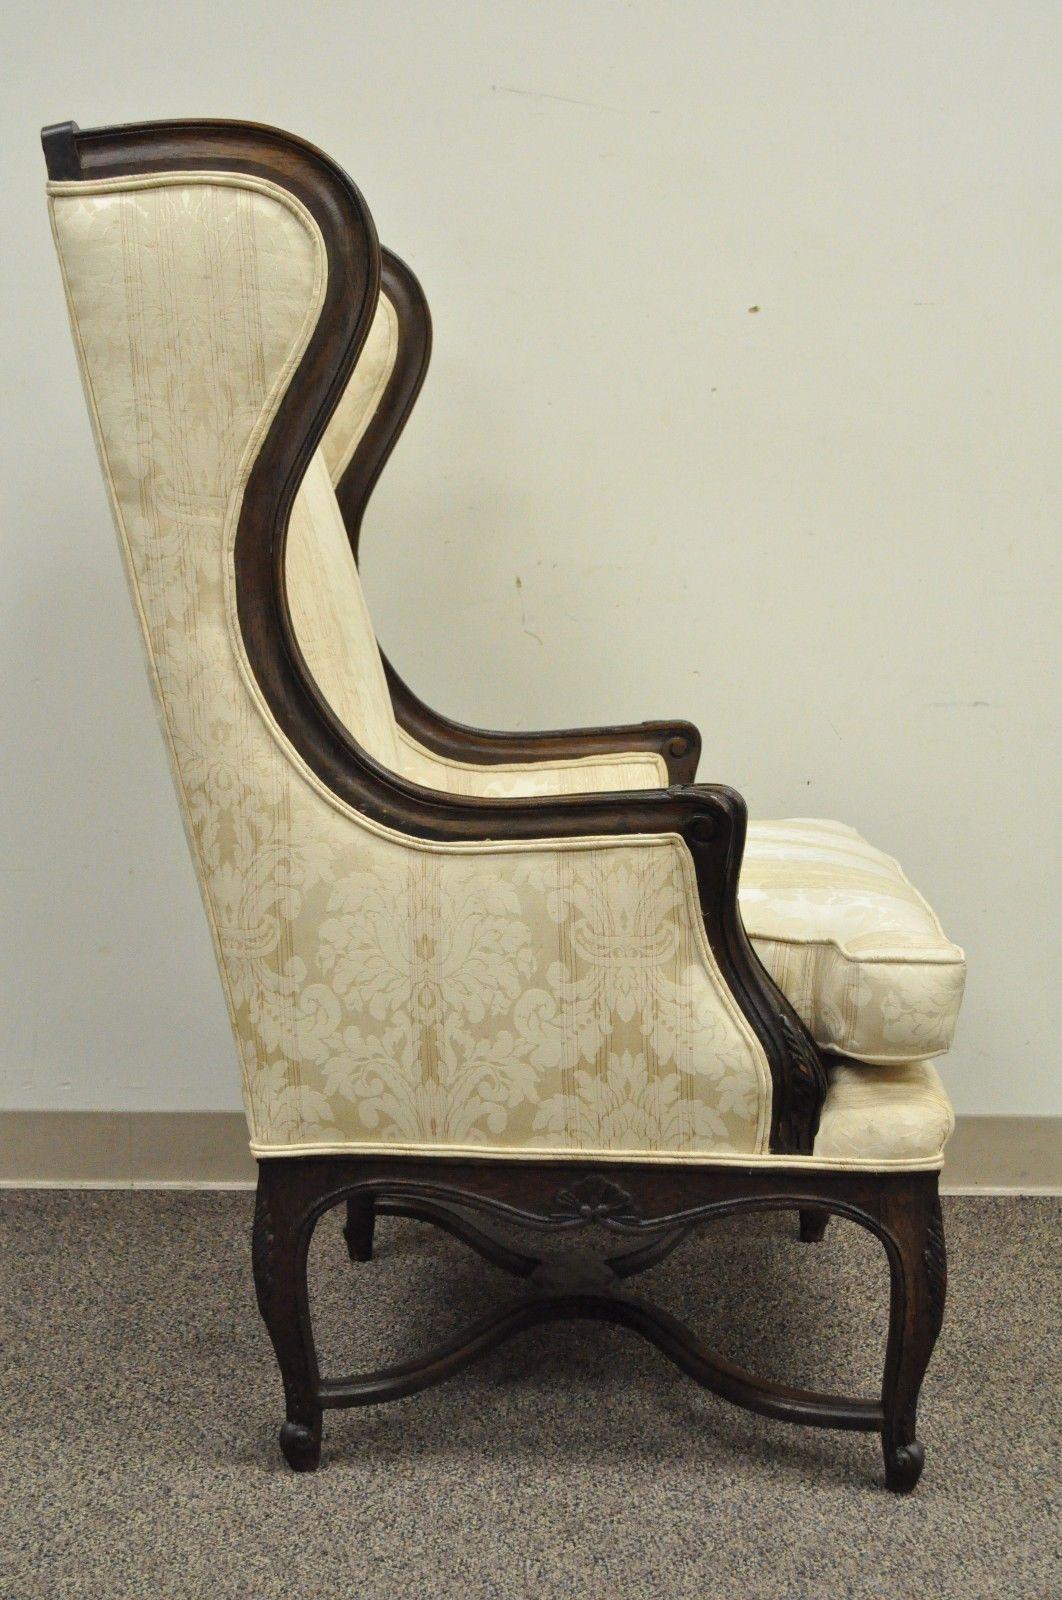 American Vintage French Country Louis XV Style Carved Walnut Wing Back Chair and Ottoman